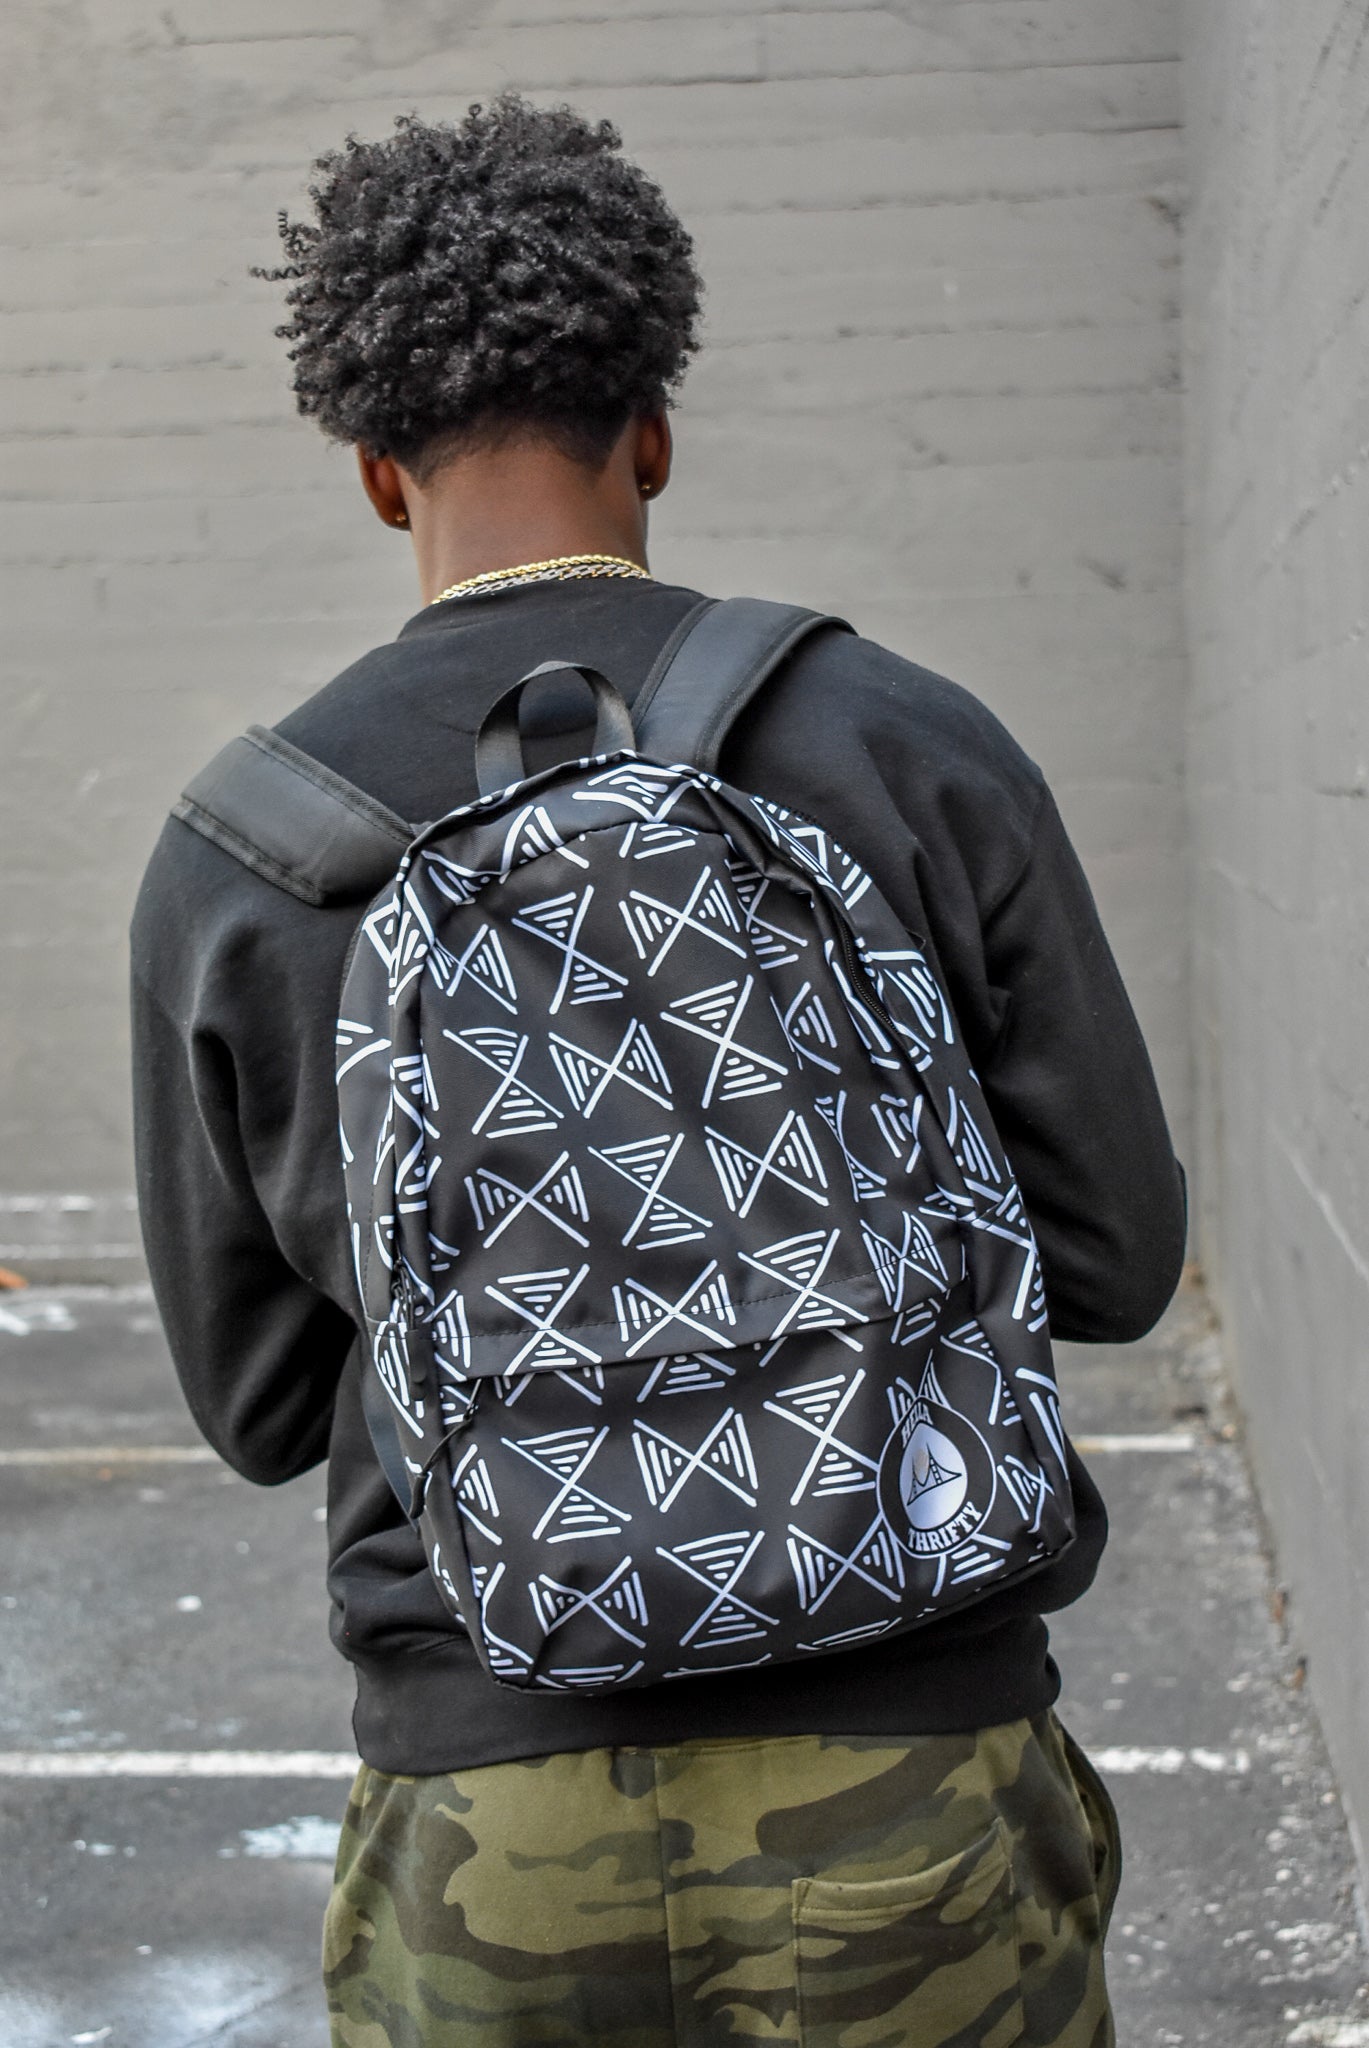 Model with black african print backpack.